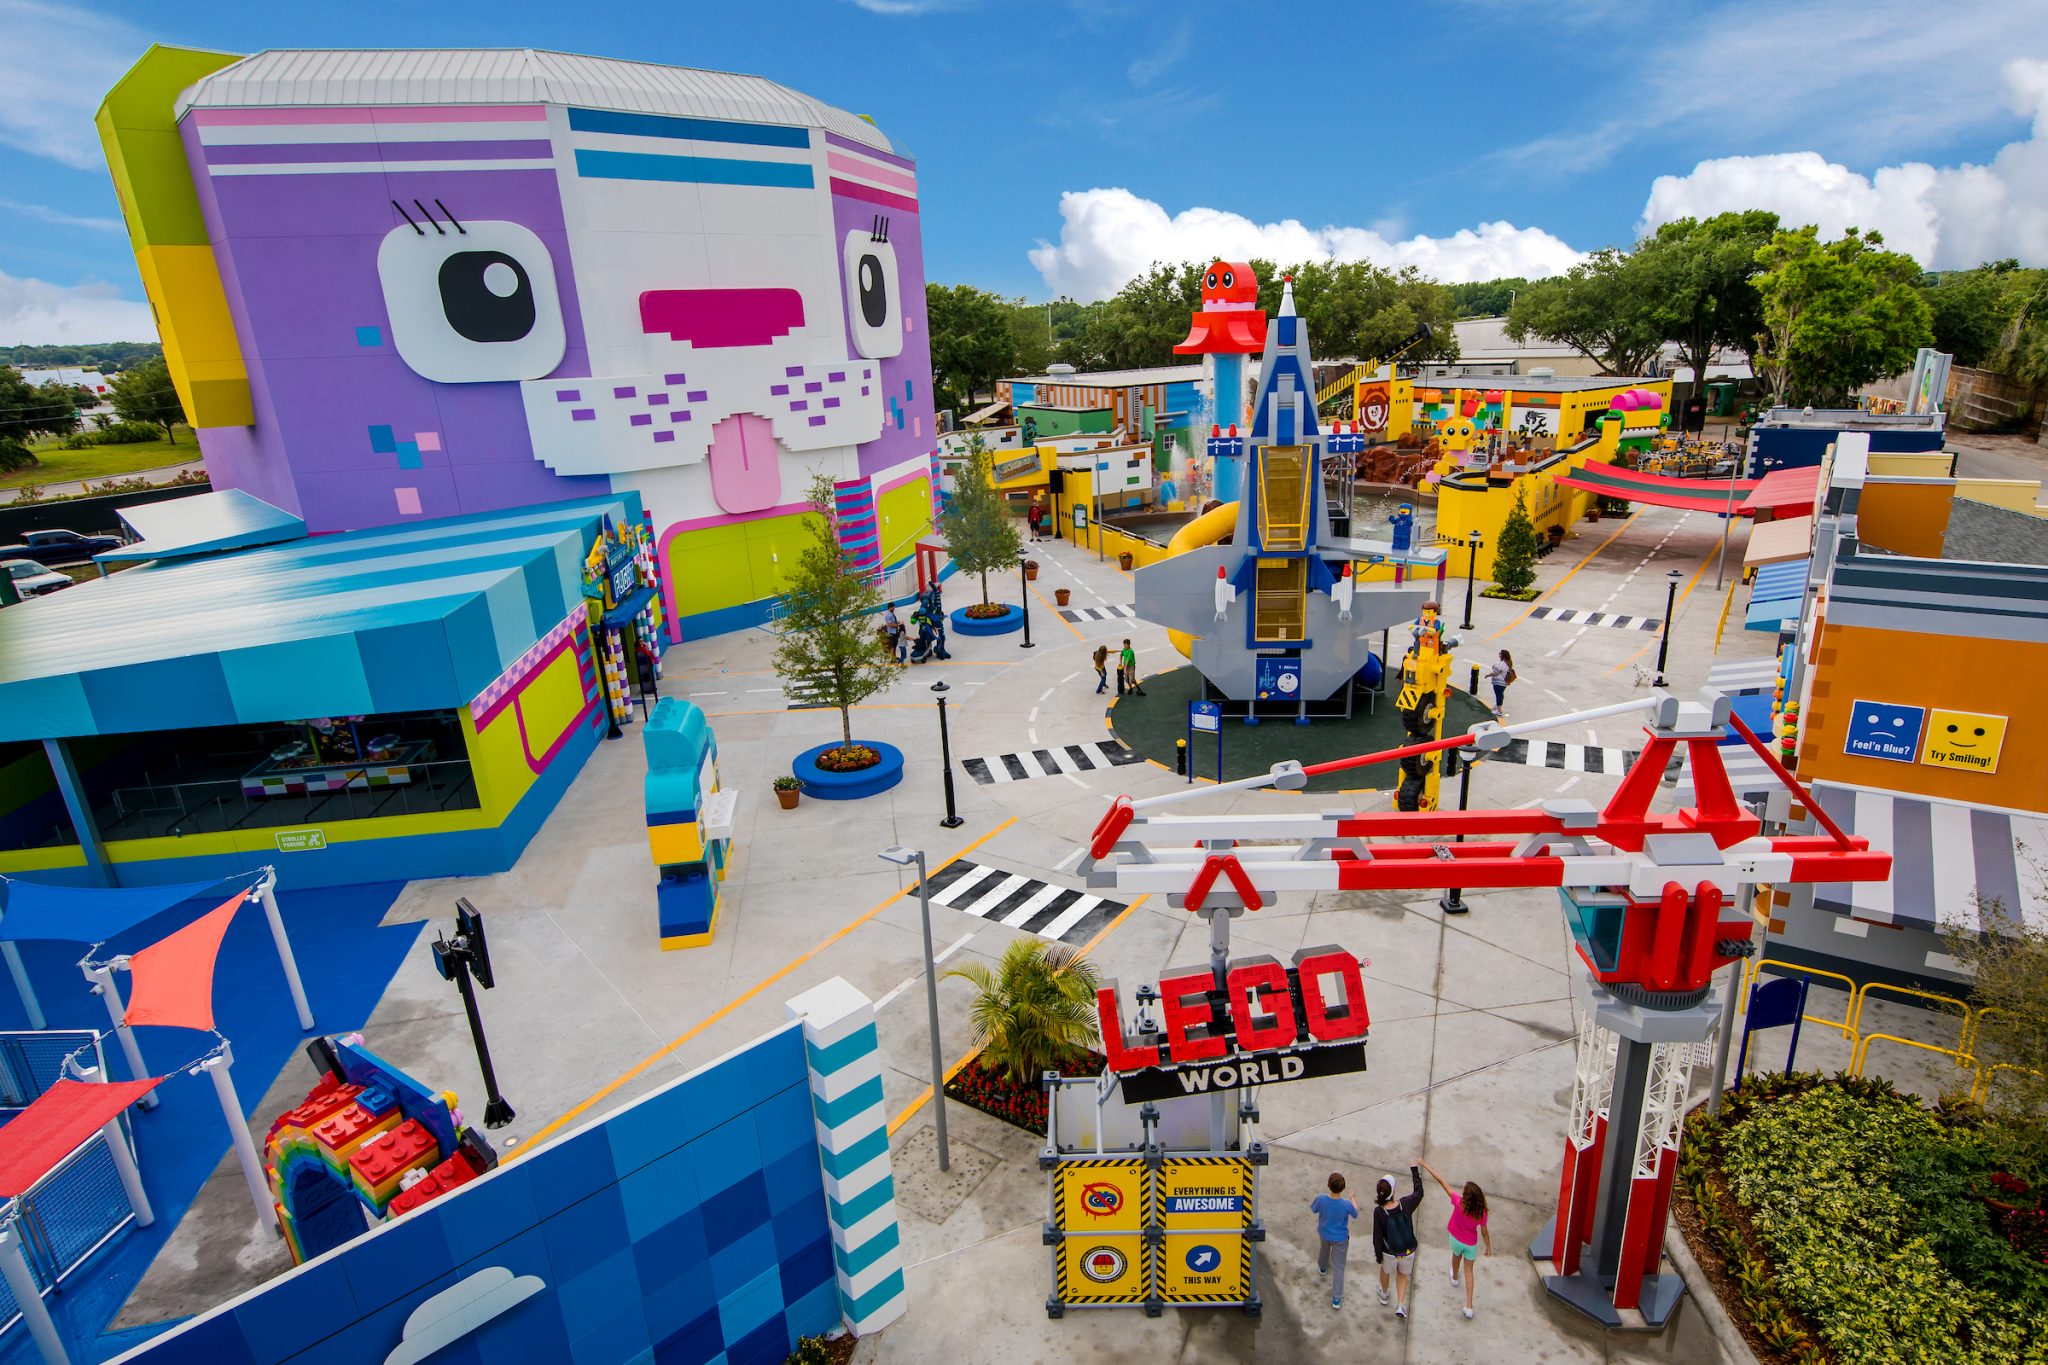 An above shot of LEGO world with a large building of a purple cat made out of LEGO